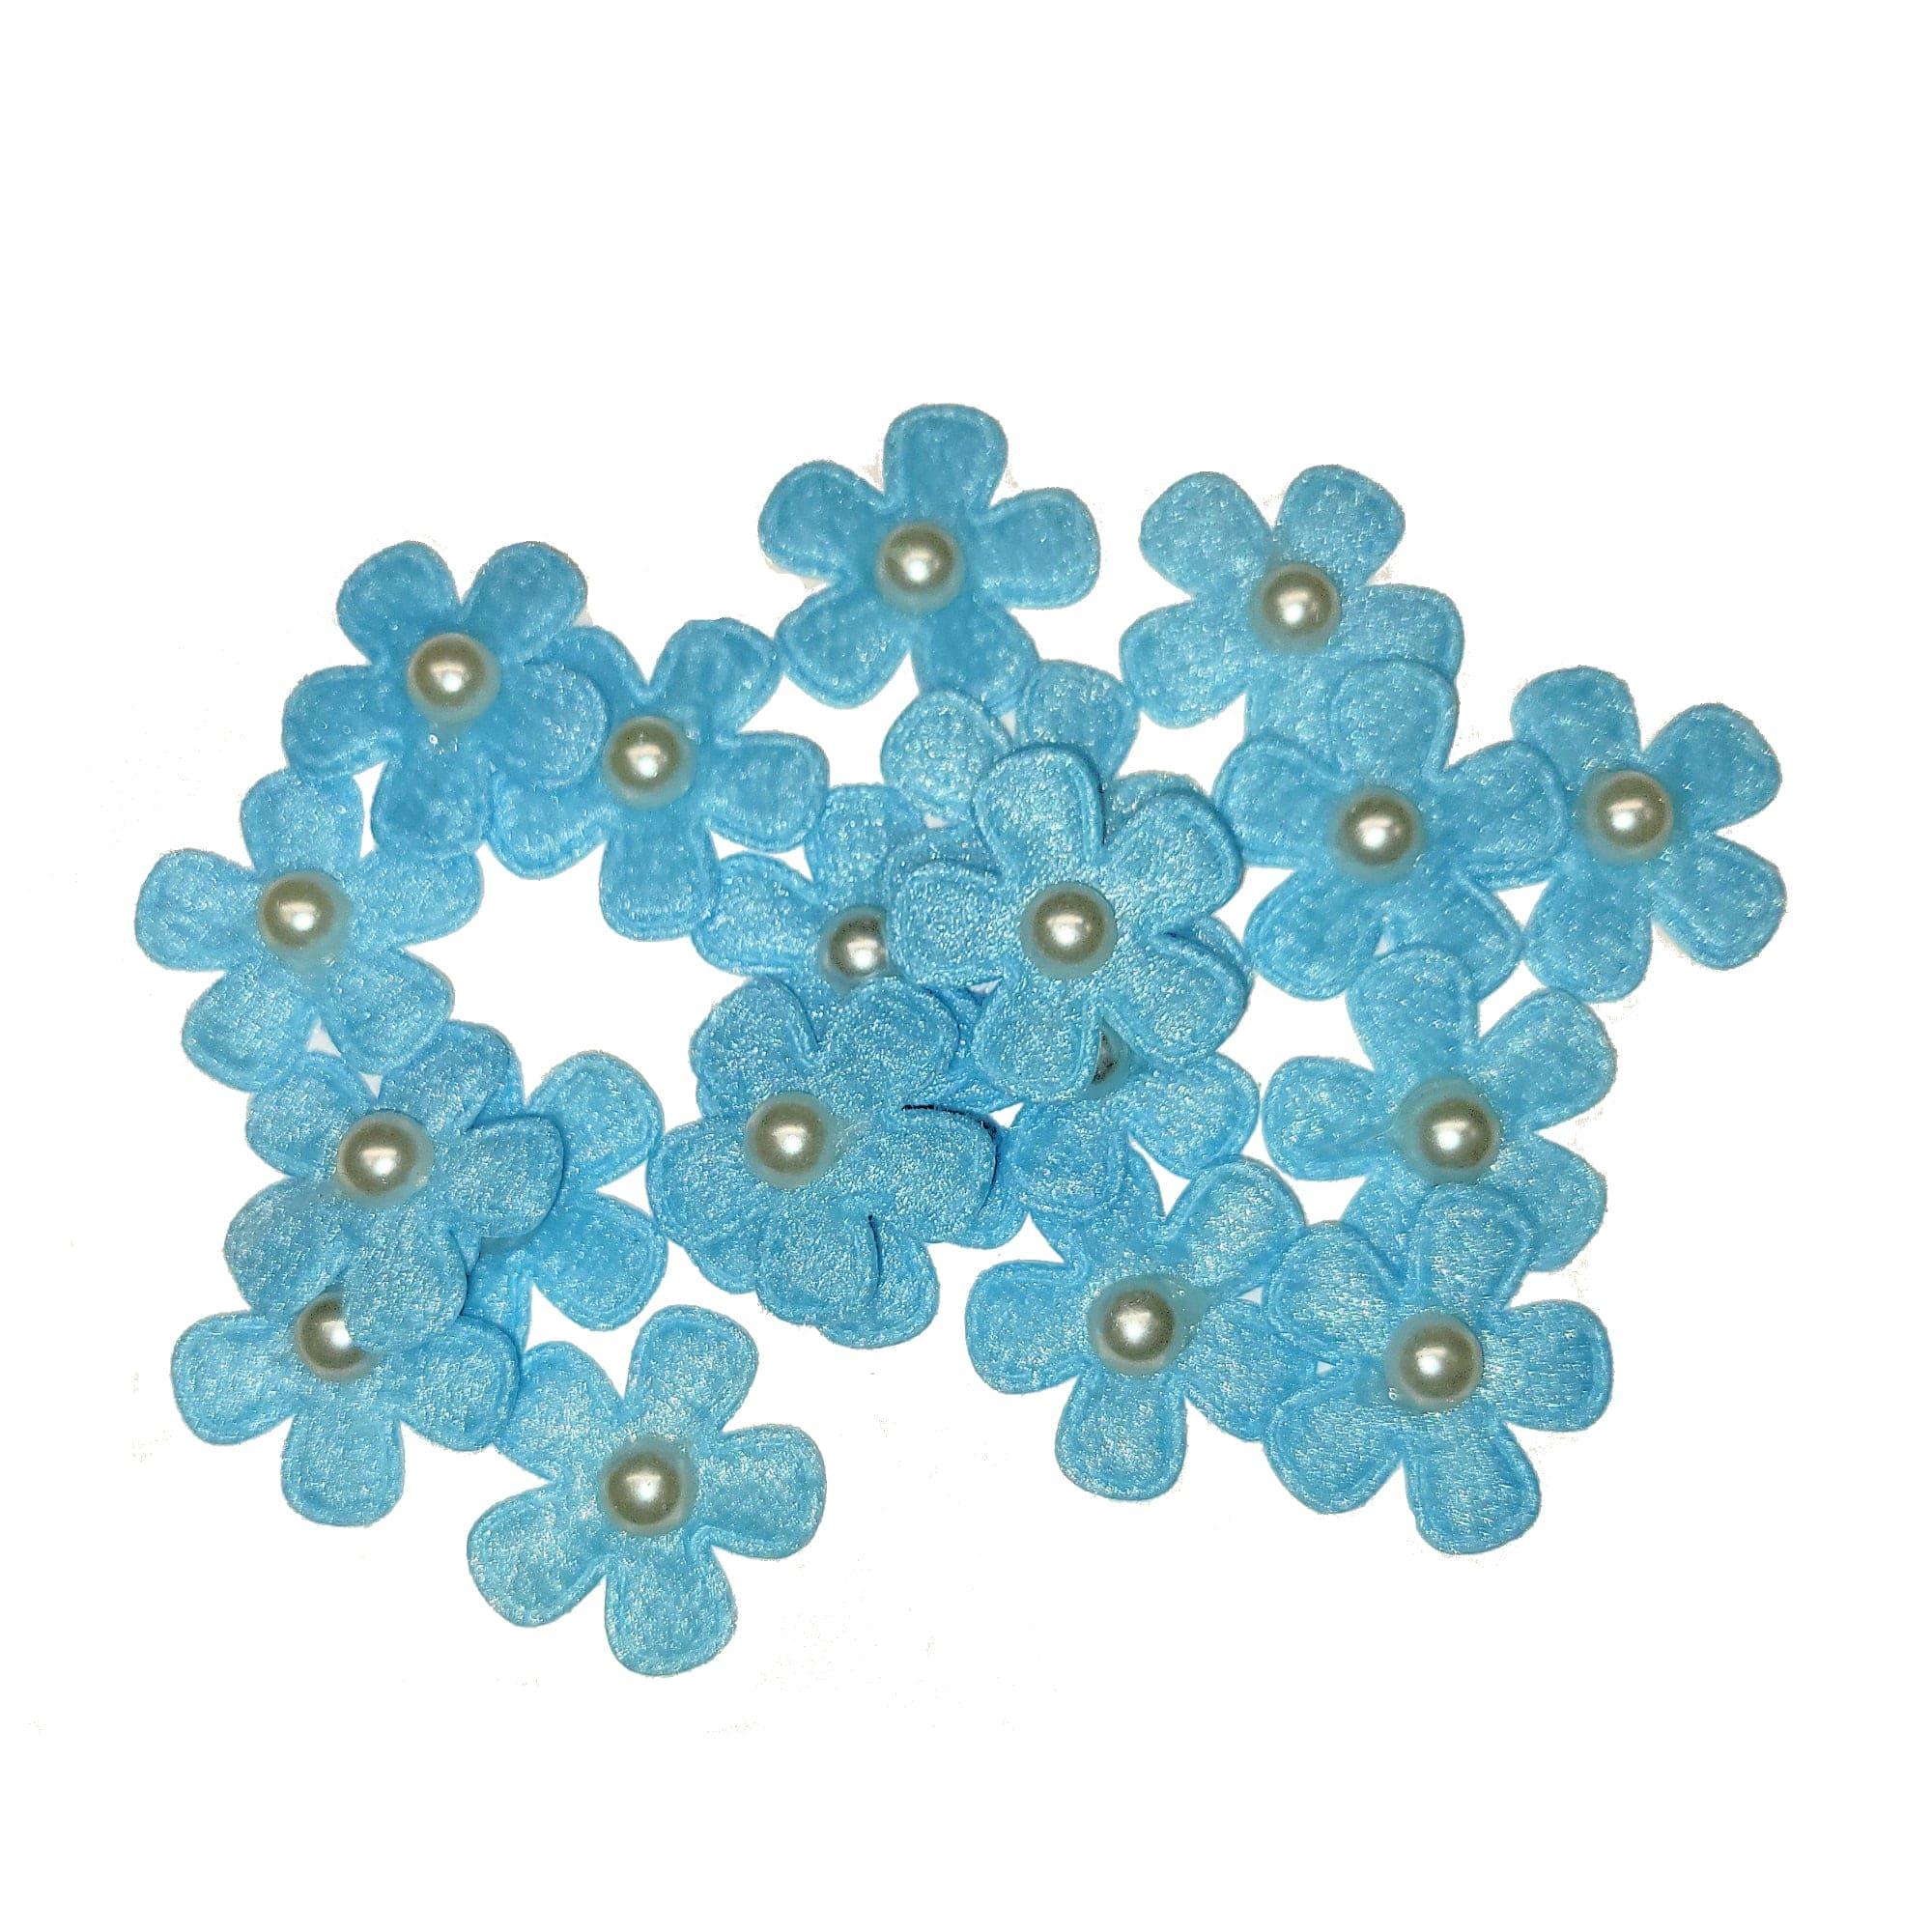 Pearl Petals Collection Blue 1" Fabric Flowers with Pearl - Pkg. of 20